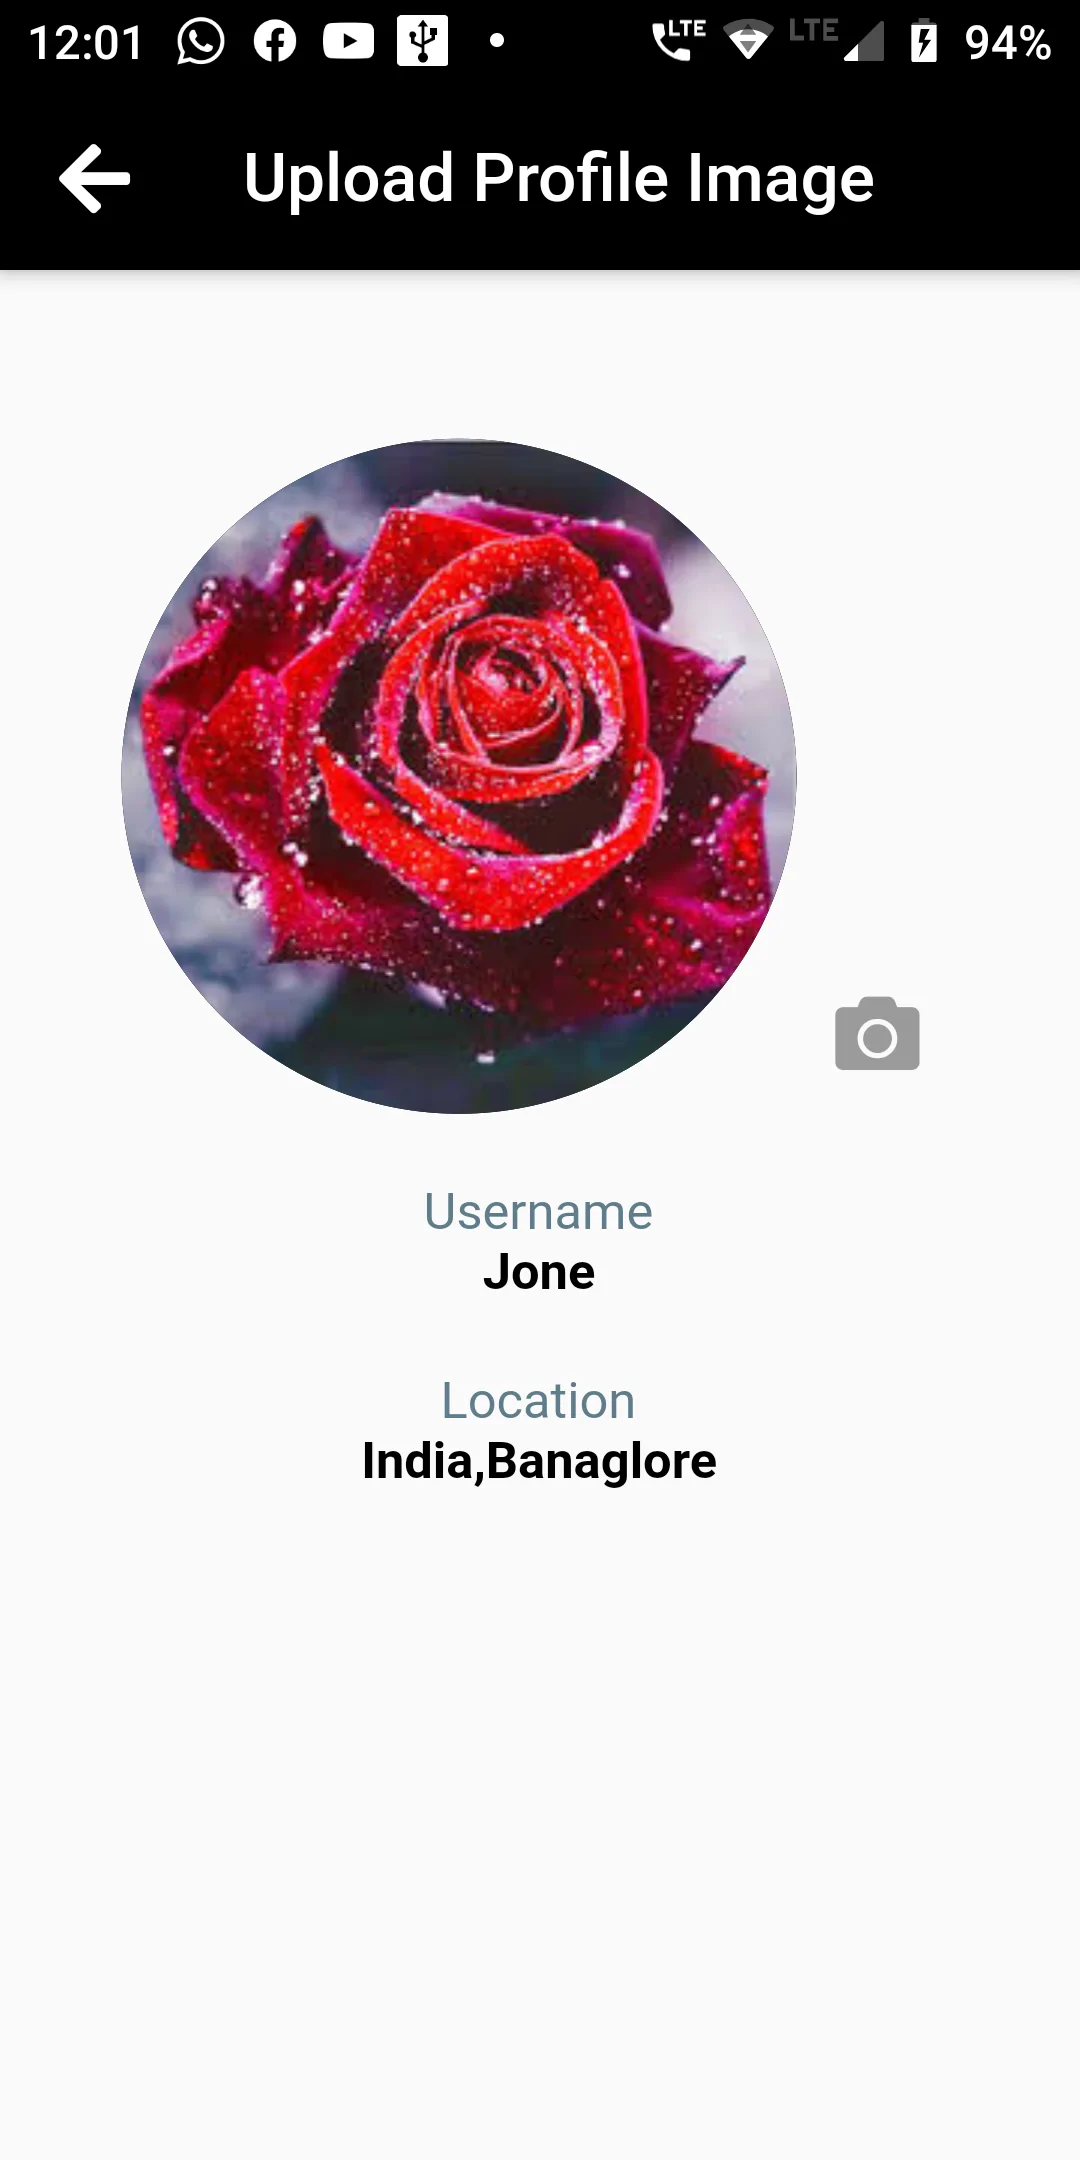 How To Upload Profile Image In Flutter Android App